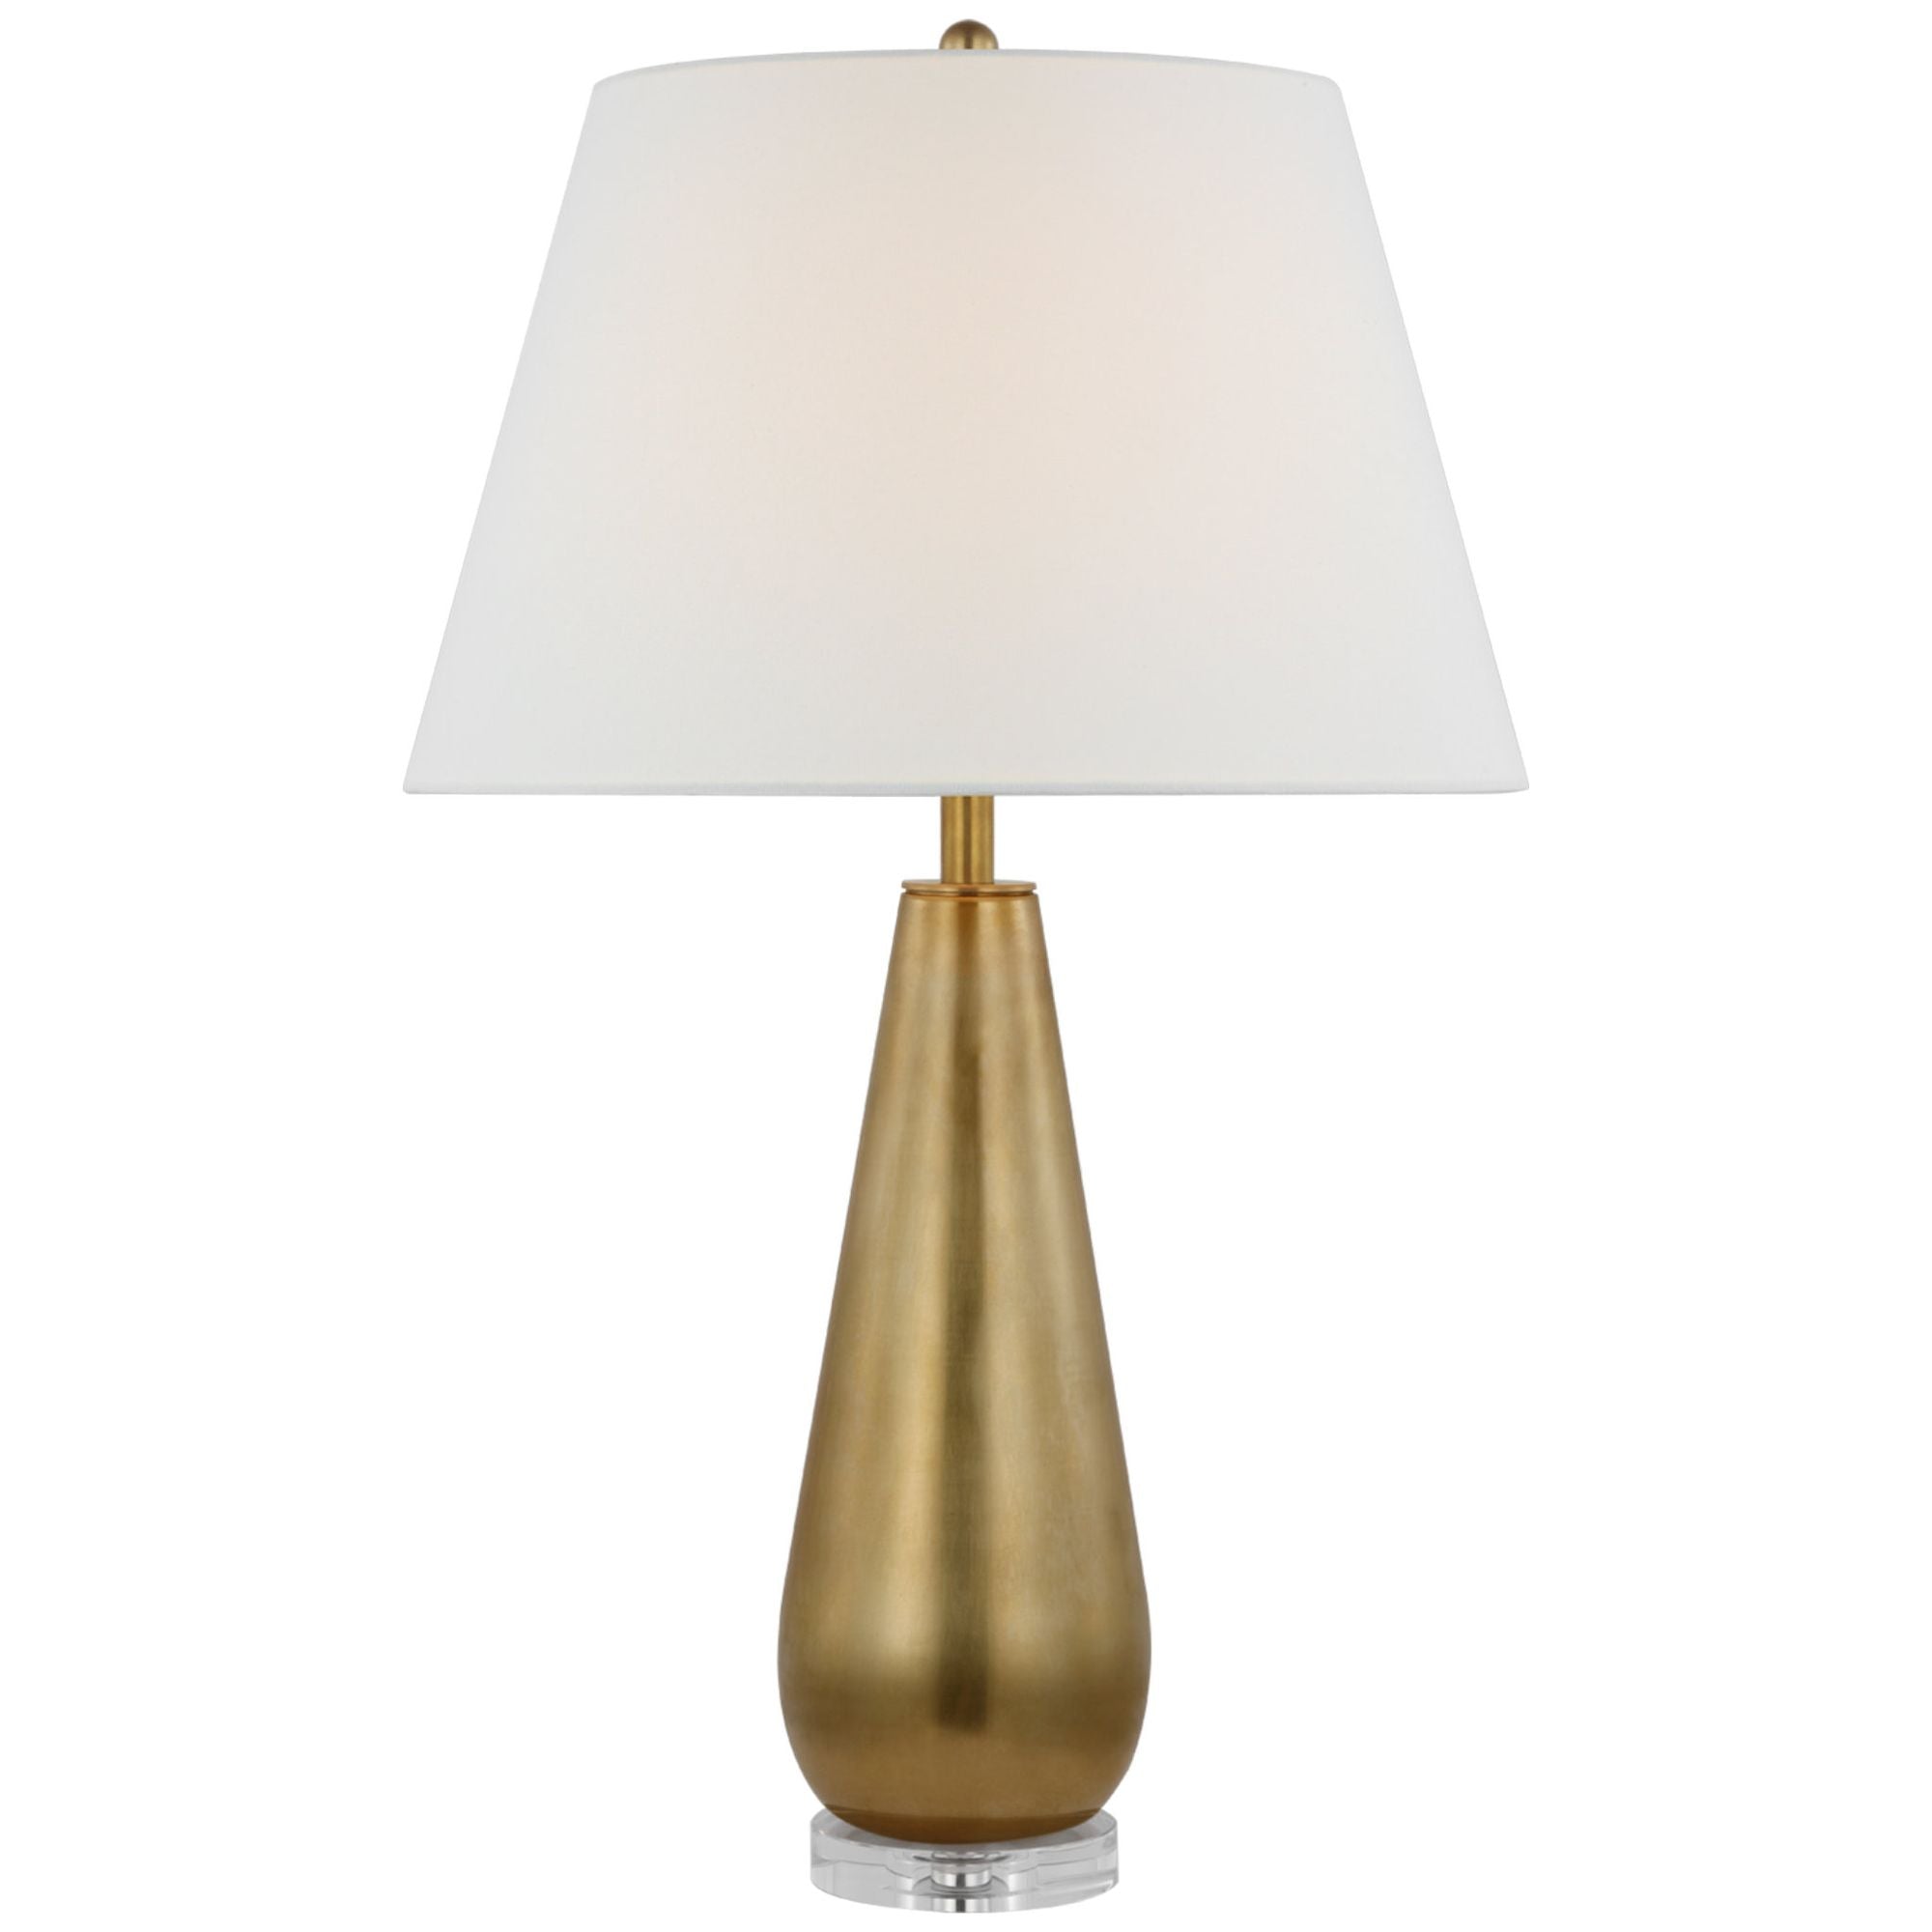 Buy Classical Urn Form Medium Table Lamp By Visual Comfort